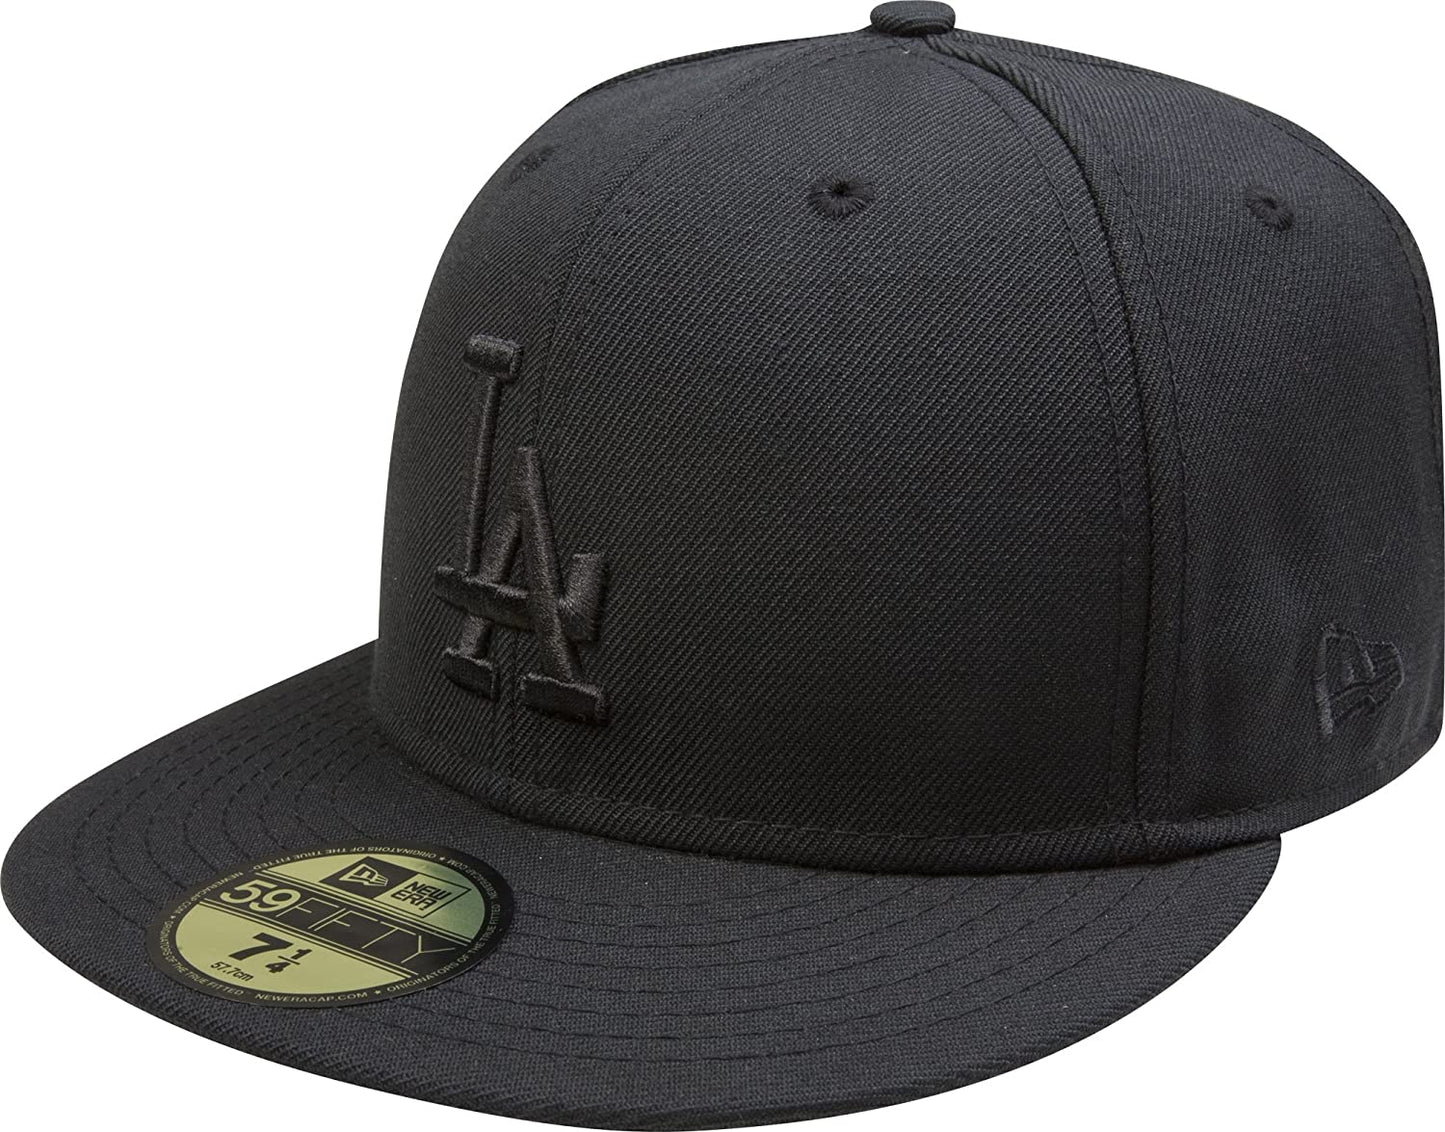 Los Angeles Dodgers New Era MLB Black on Black 59FIFTY Fitted Cap